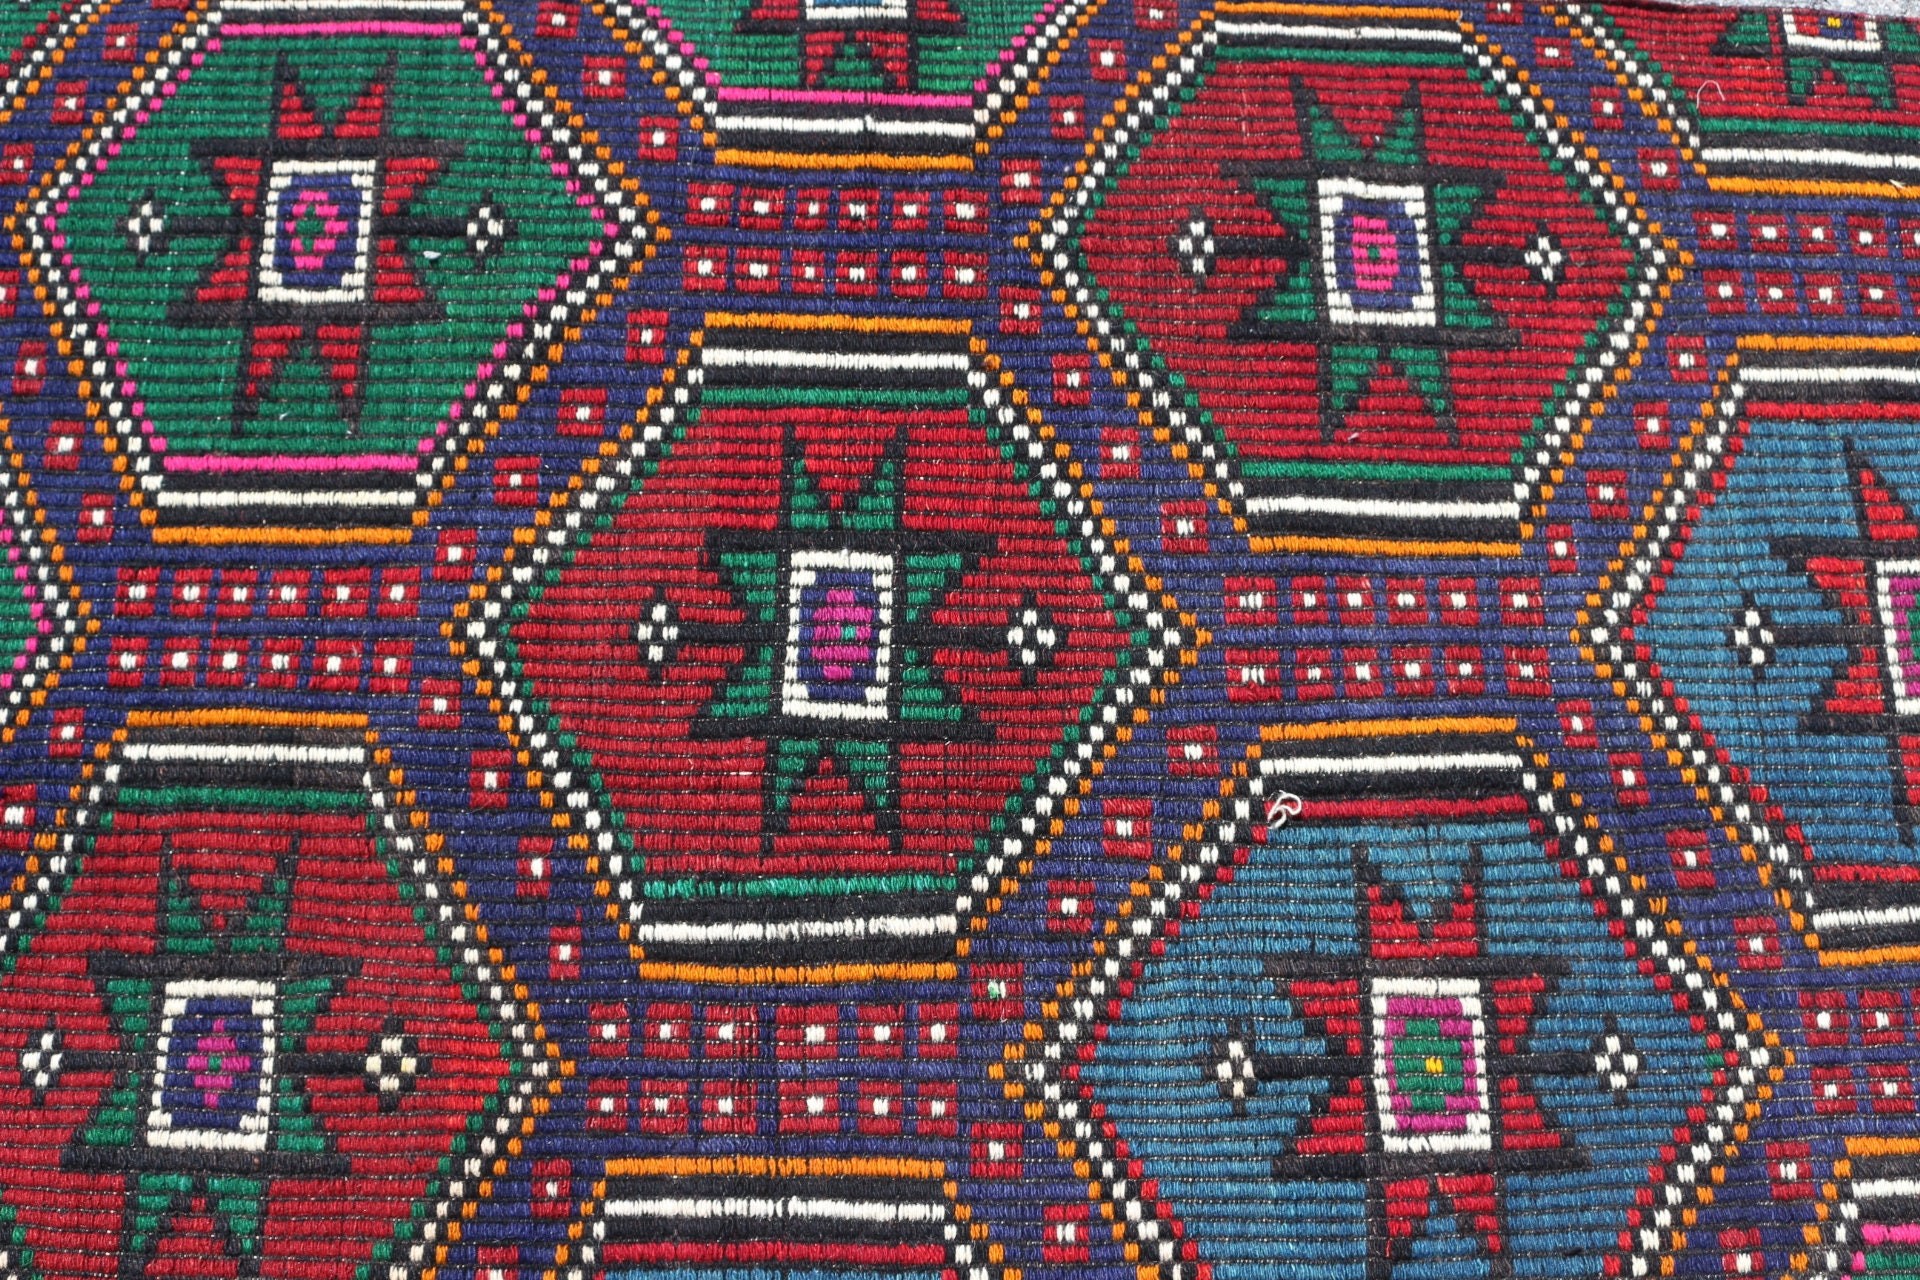 Turkish Rugs, Rugs for Wall Hanging, Kitchen Rugs, Door Mat Rug, 3.1x4.6 ft Small Rug, Vintage Rug, Red Cool Rug, Entry Rug, Moroccan Rugs